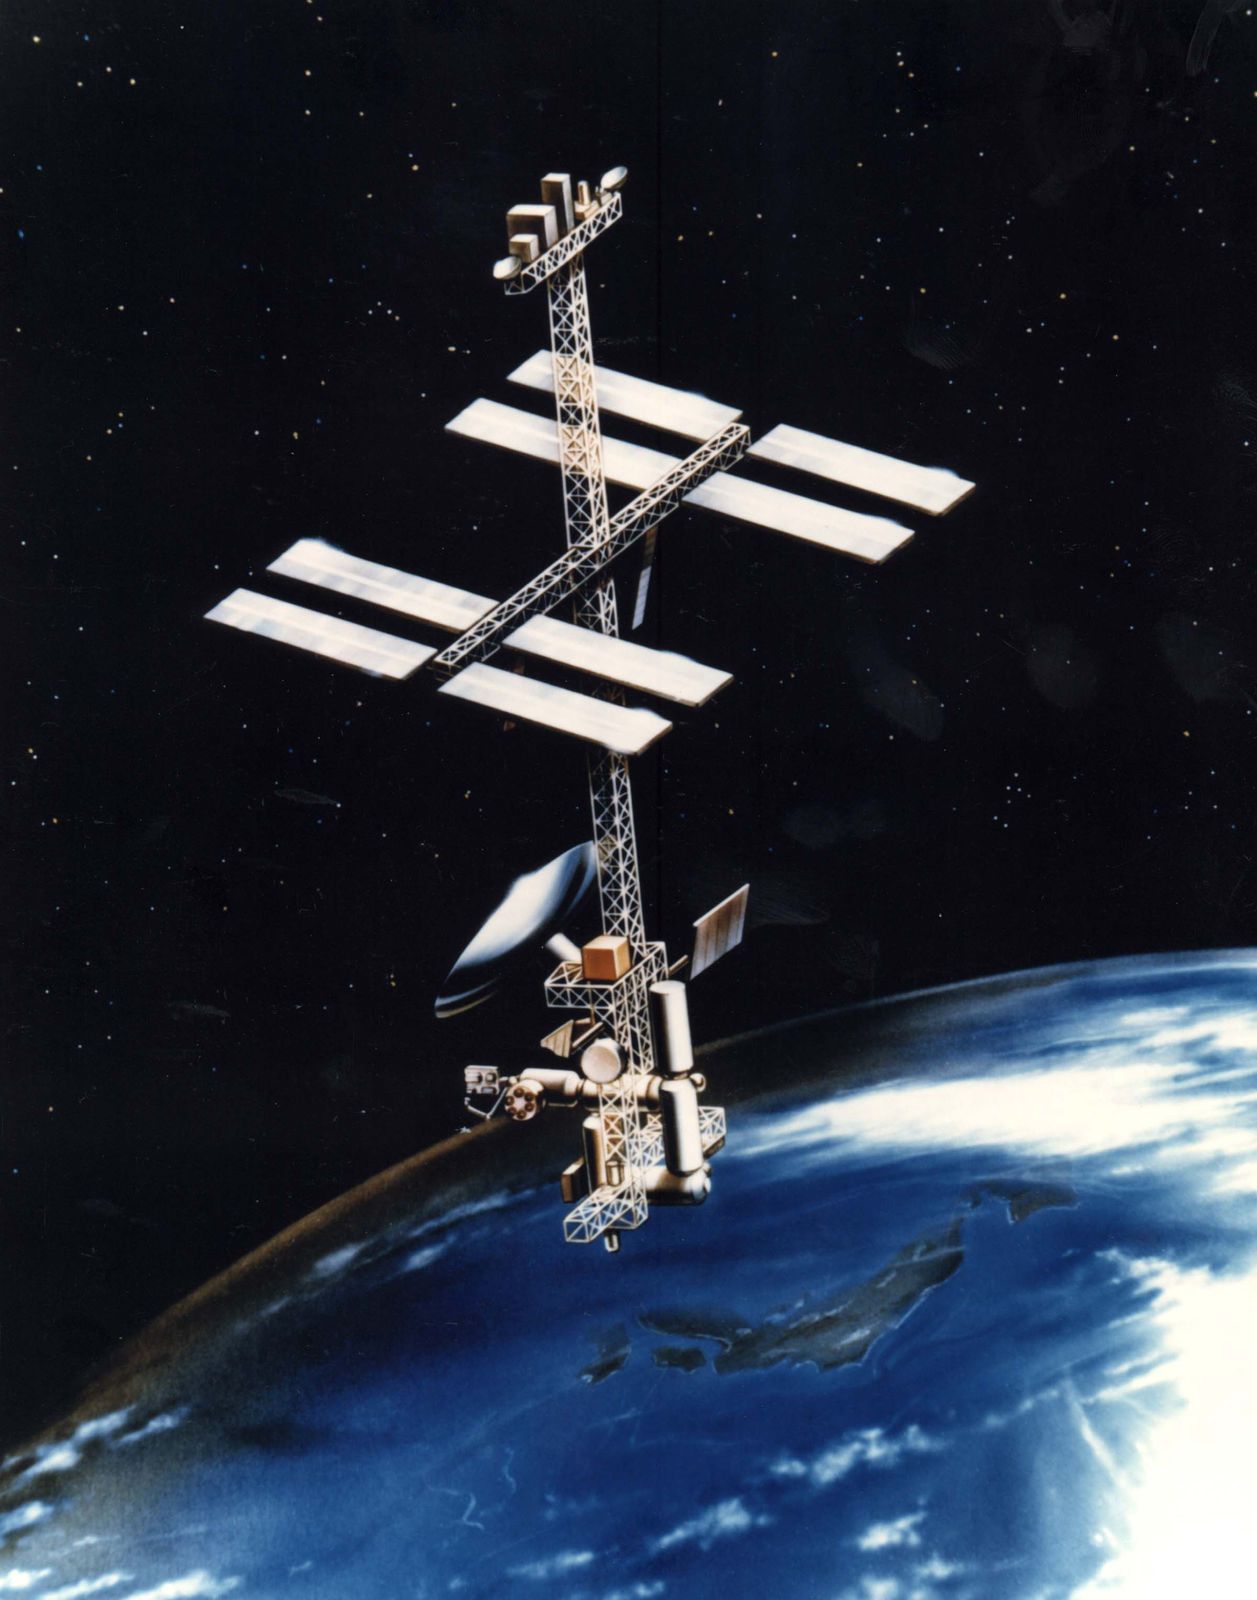 Space station concept images image 32